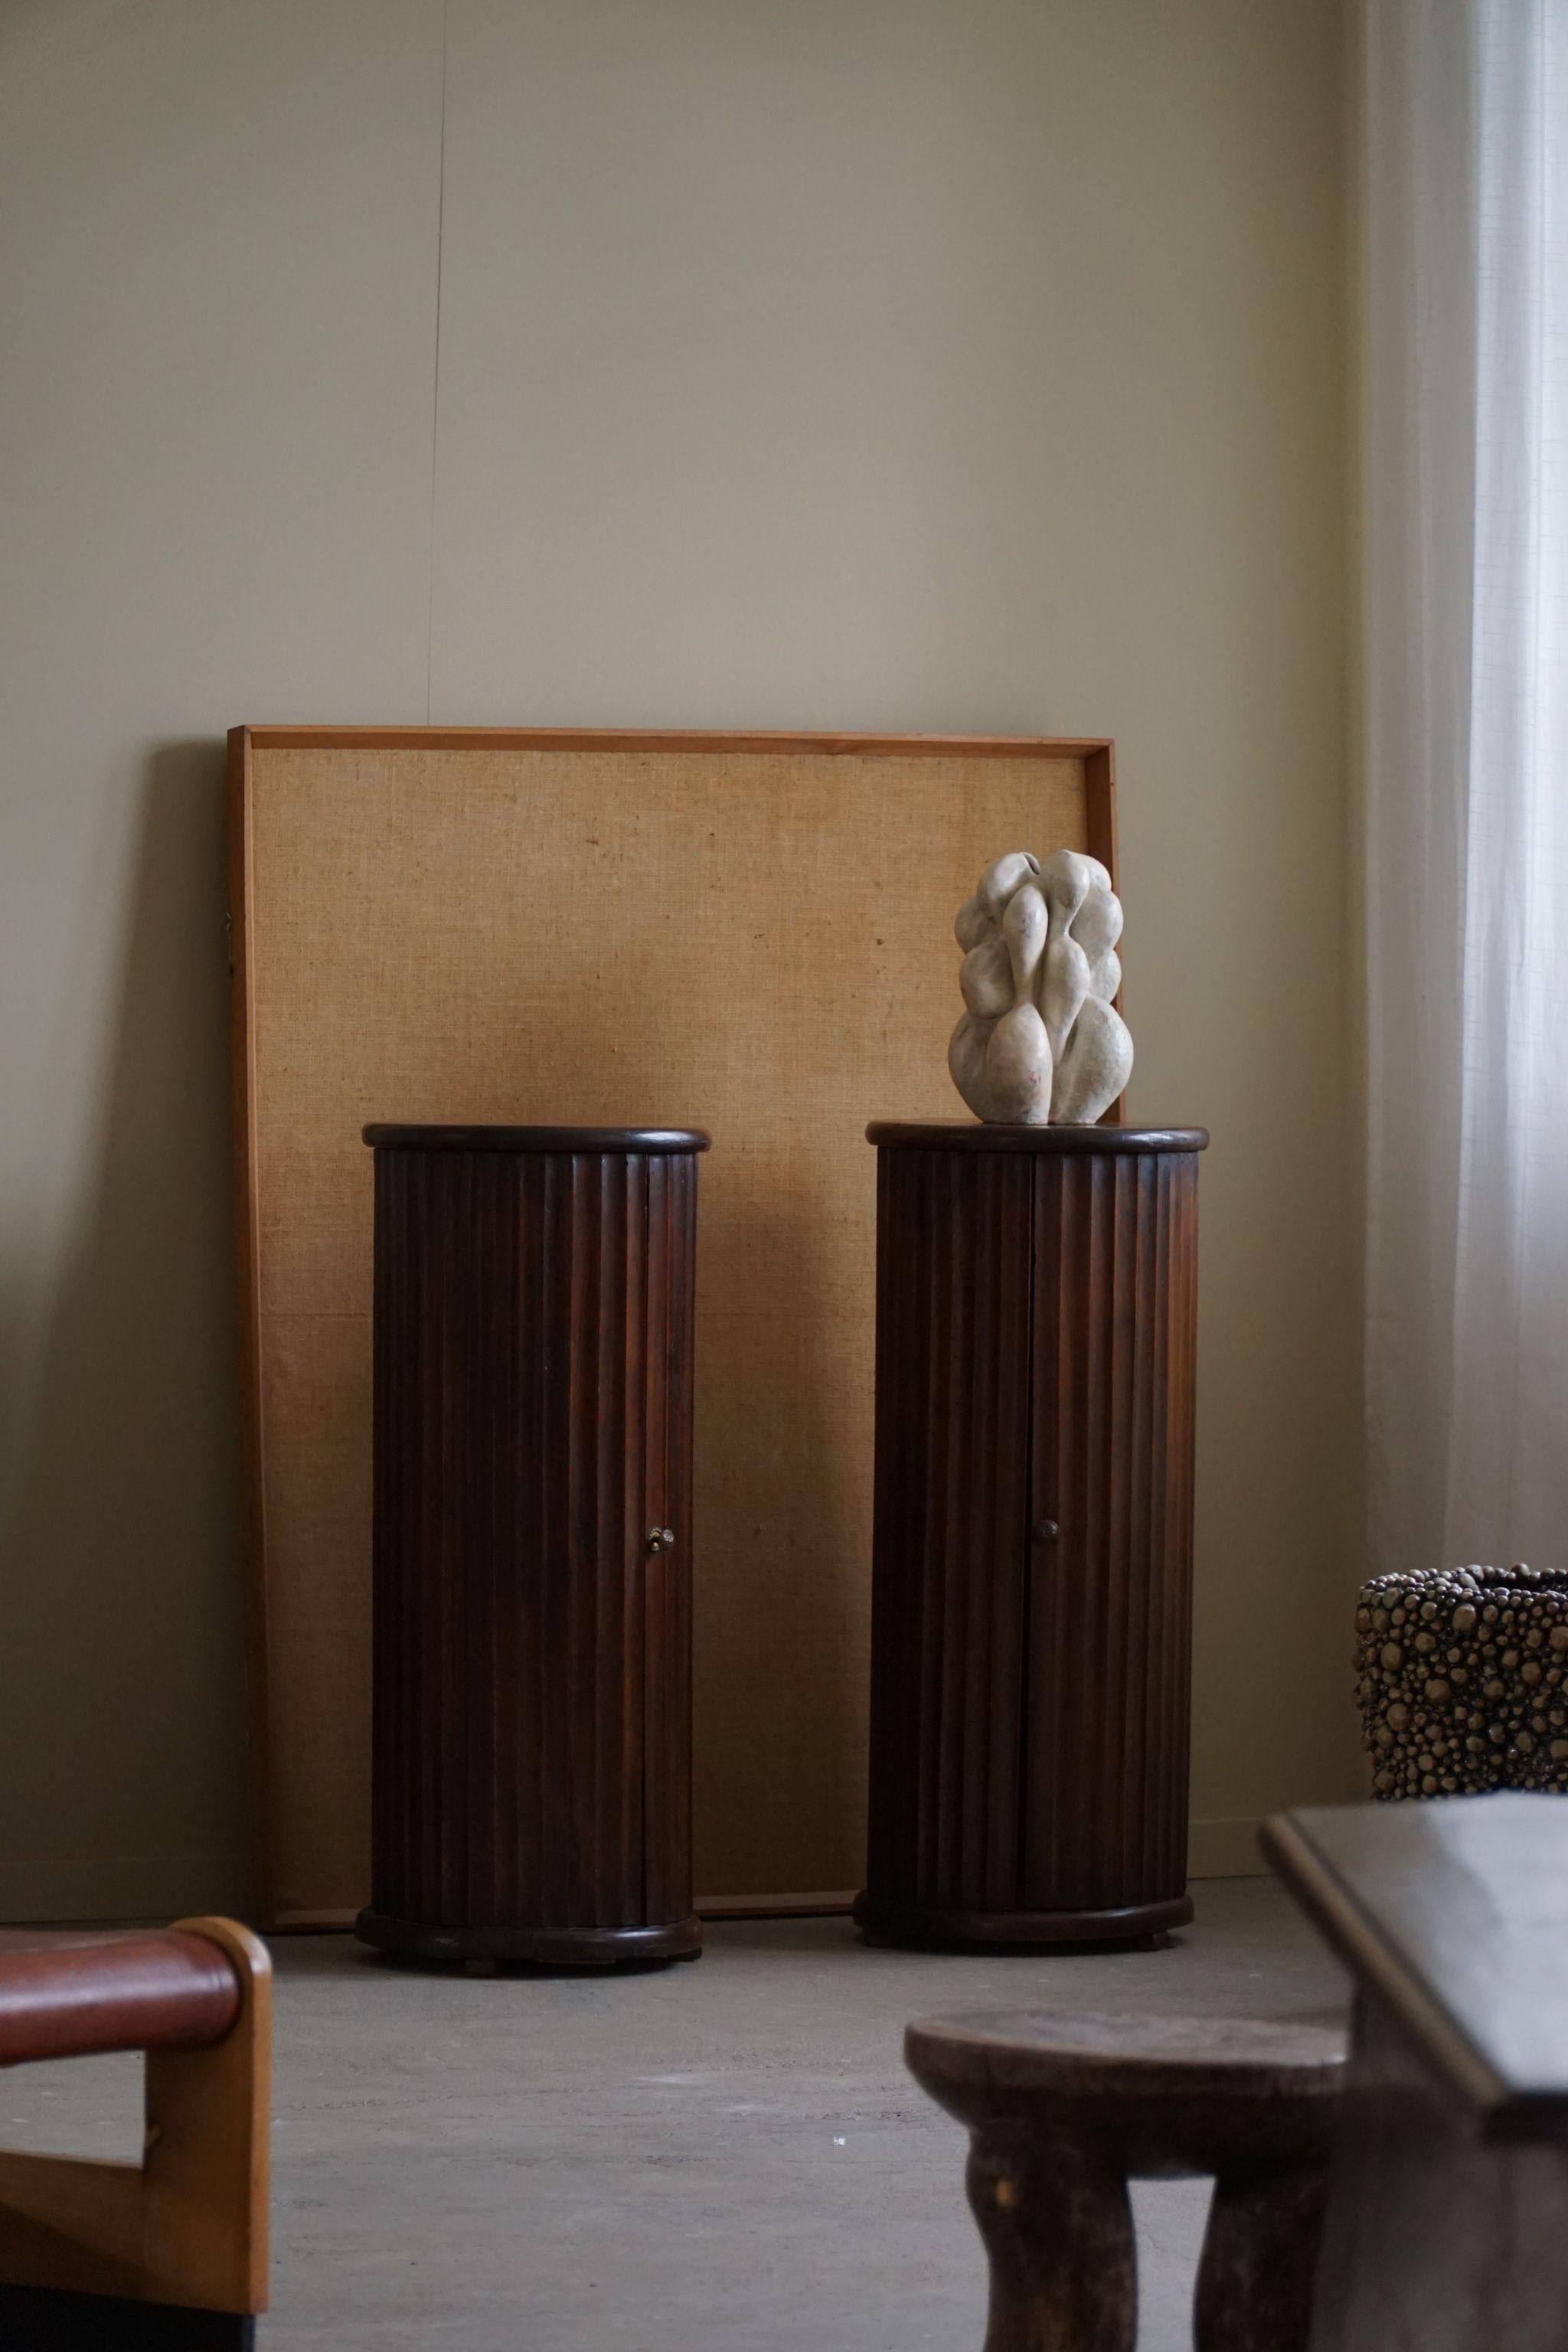 A charming pair of antique pedestals crafted in the late 19th century by an Italian cabinetmaker. Made from rich nutwood, they feature a beautifully grooved carved front design. Not just some elegant accents, these pedestals also offer practicality